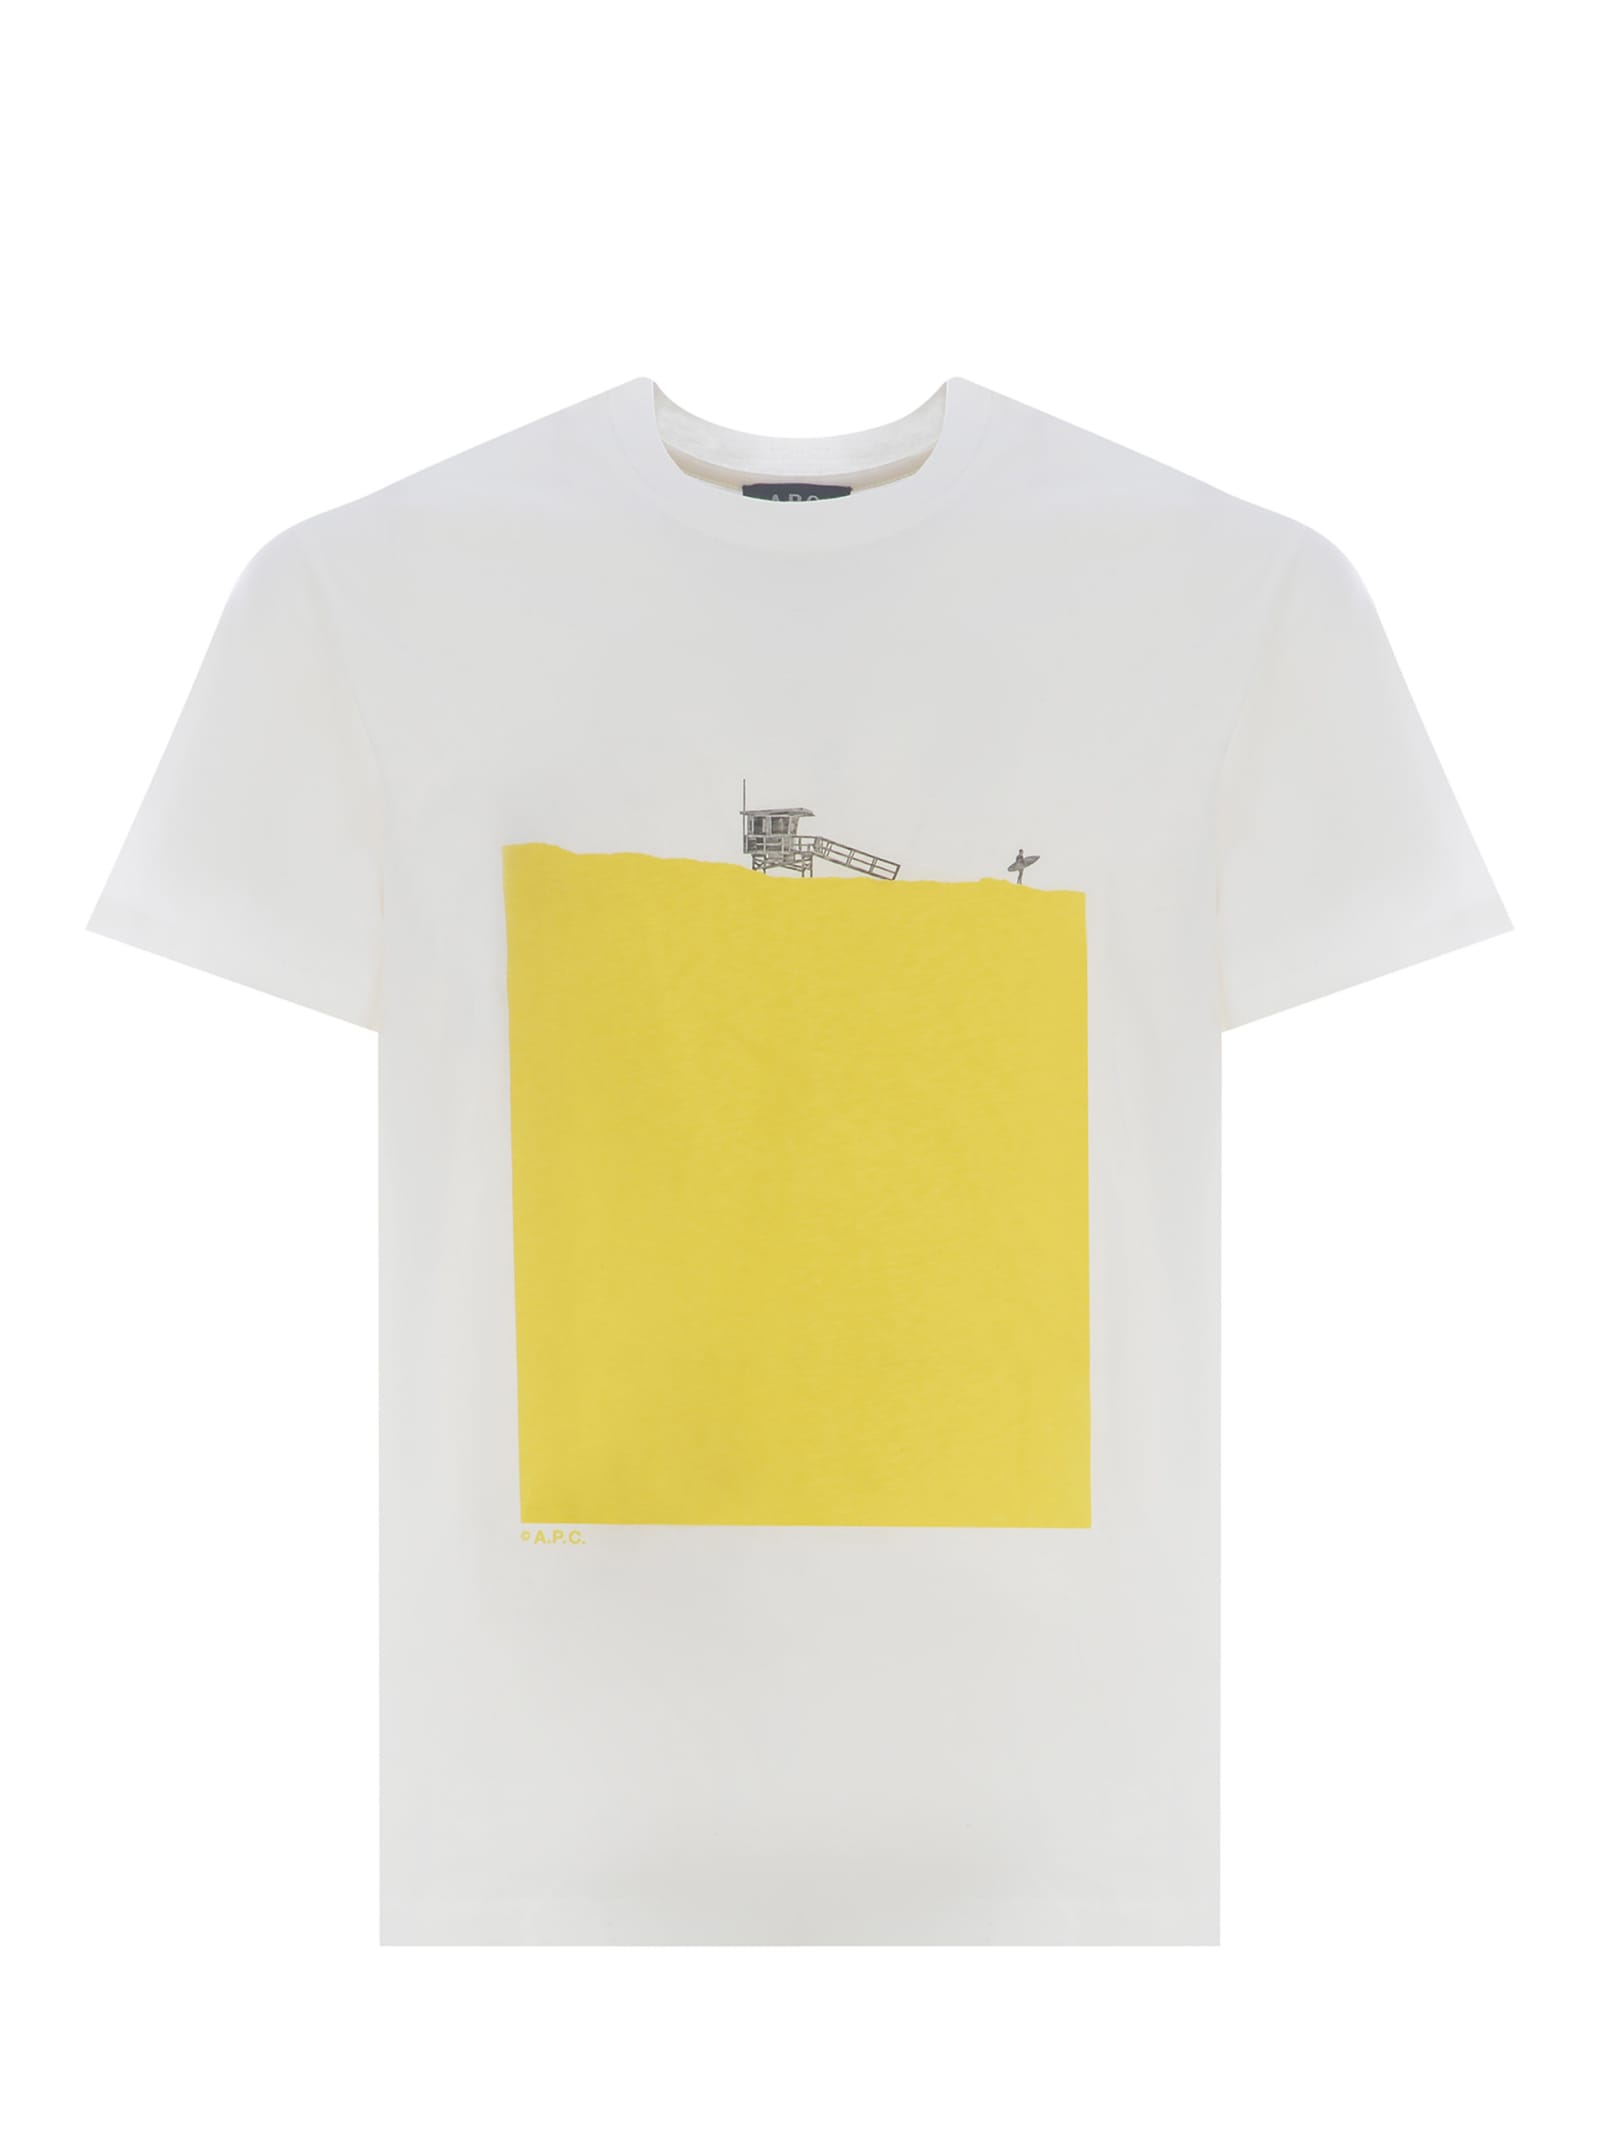 Shop Apc T-shirt A.p.c. Crush Made Of Cotton In White